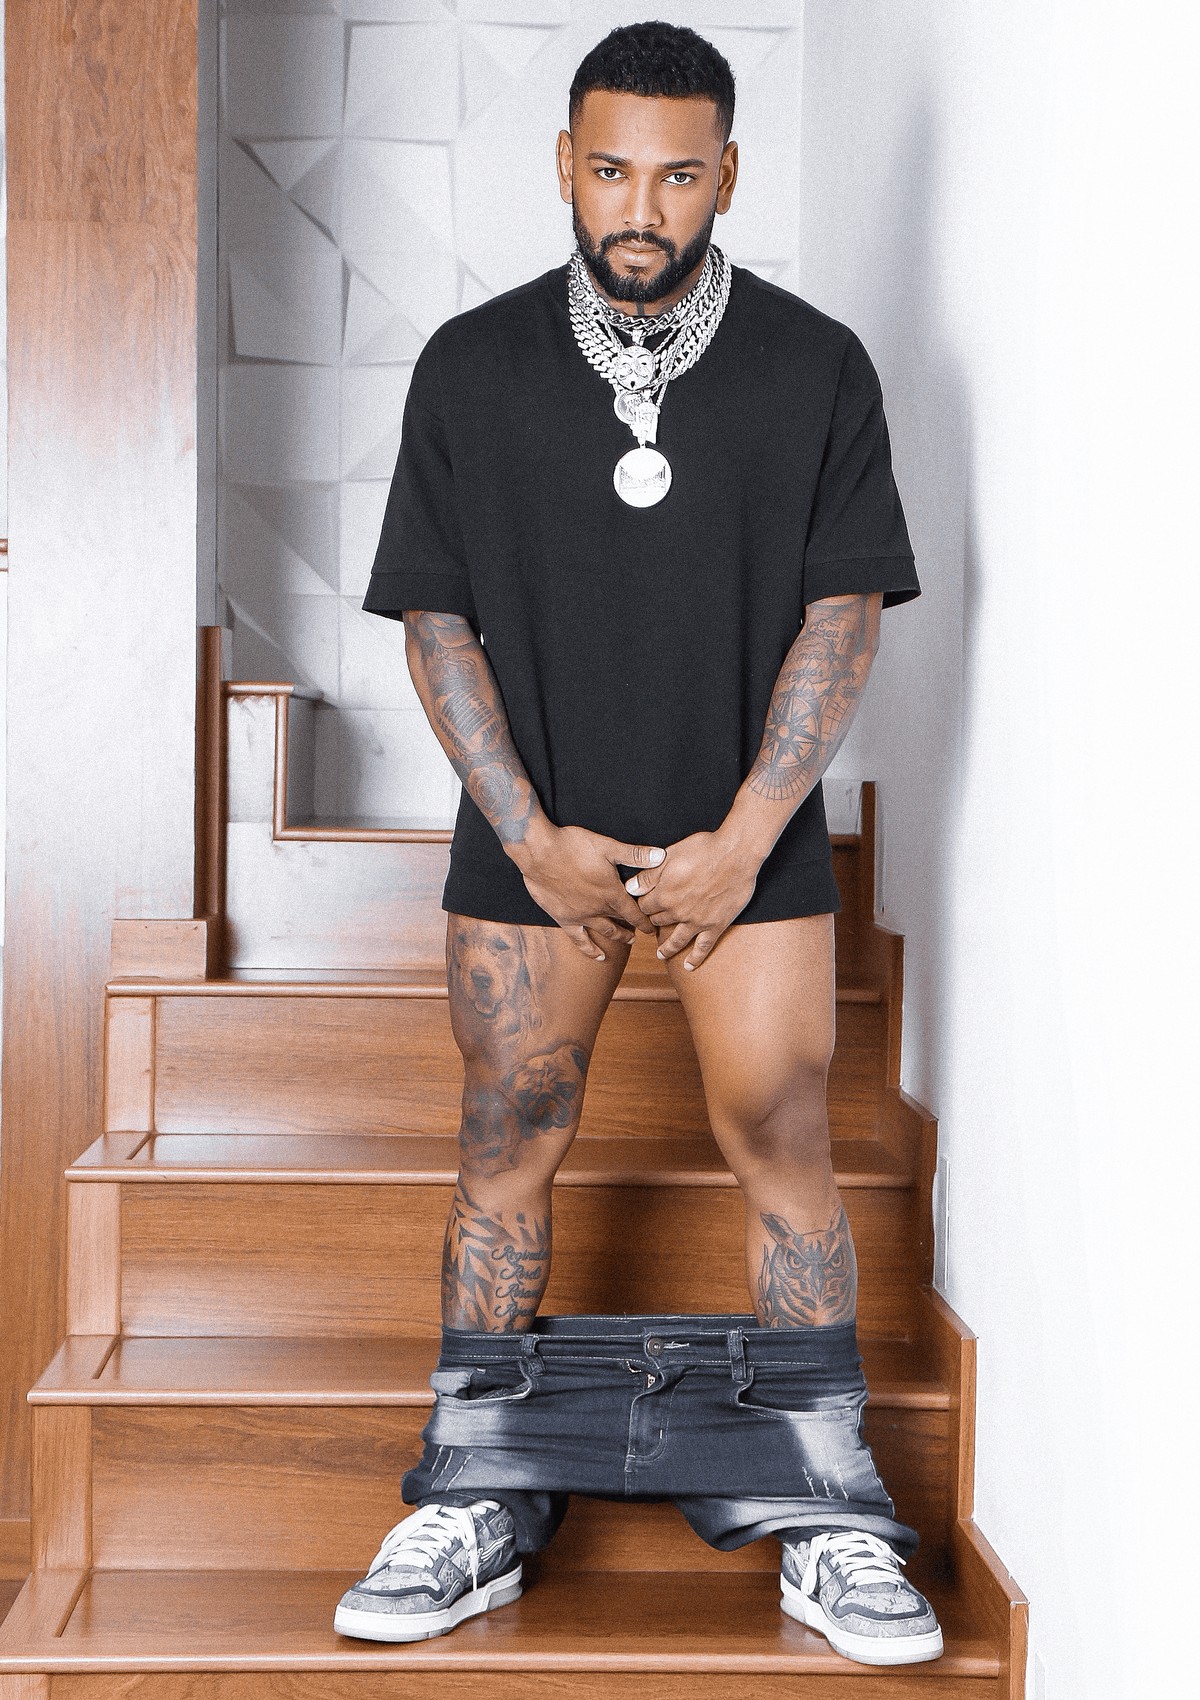 After controversy, Nego do Borel talks about reformulating his career and entering an adult content platform: ‘Controversy now only on OnlyFans’